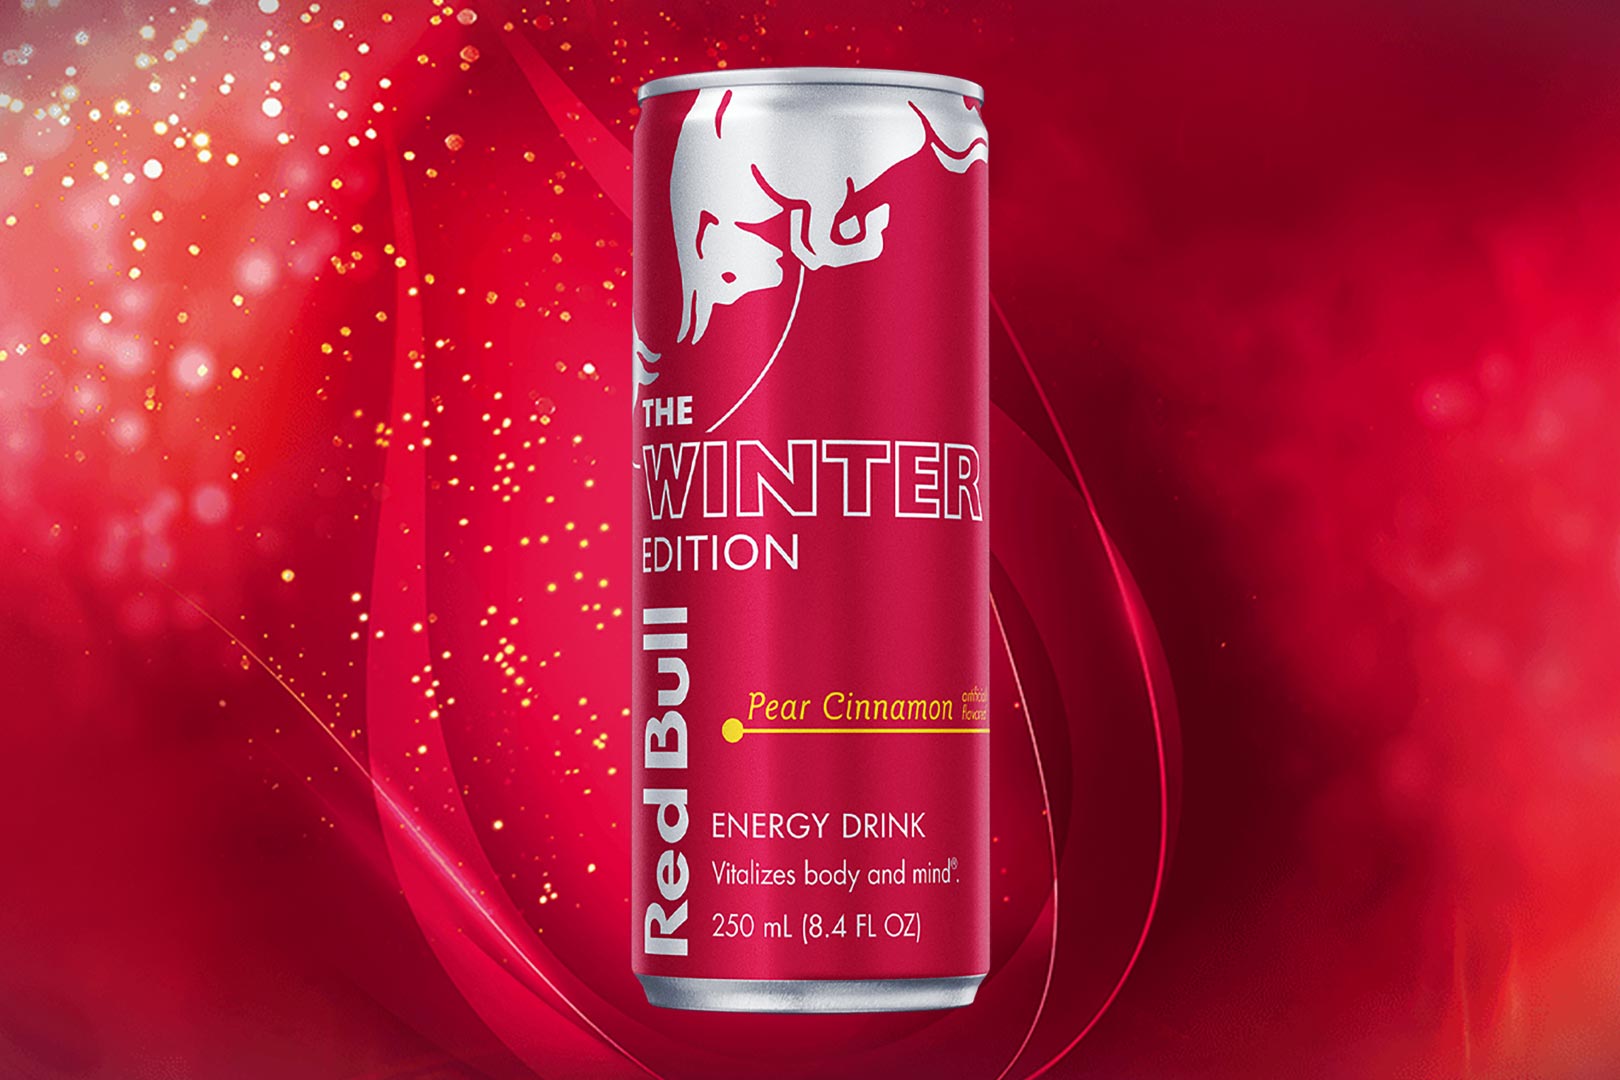 Red Bull's limitedtime 2023 Winter Edition is Pear Cinnamon